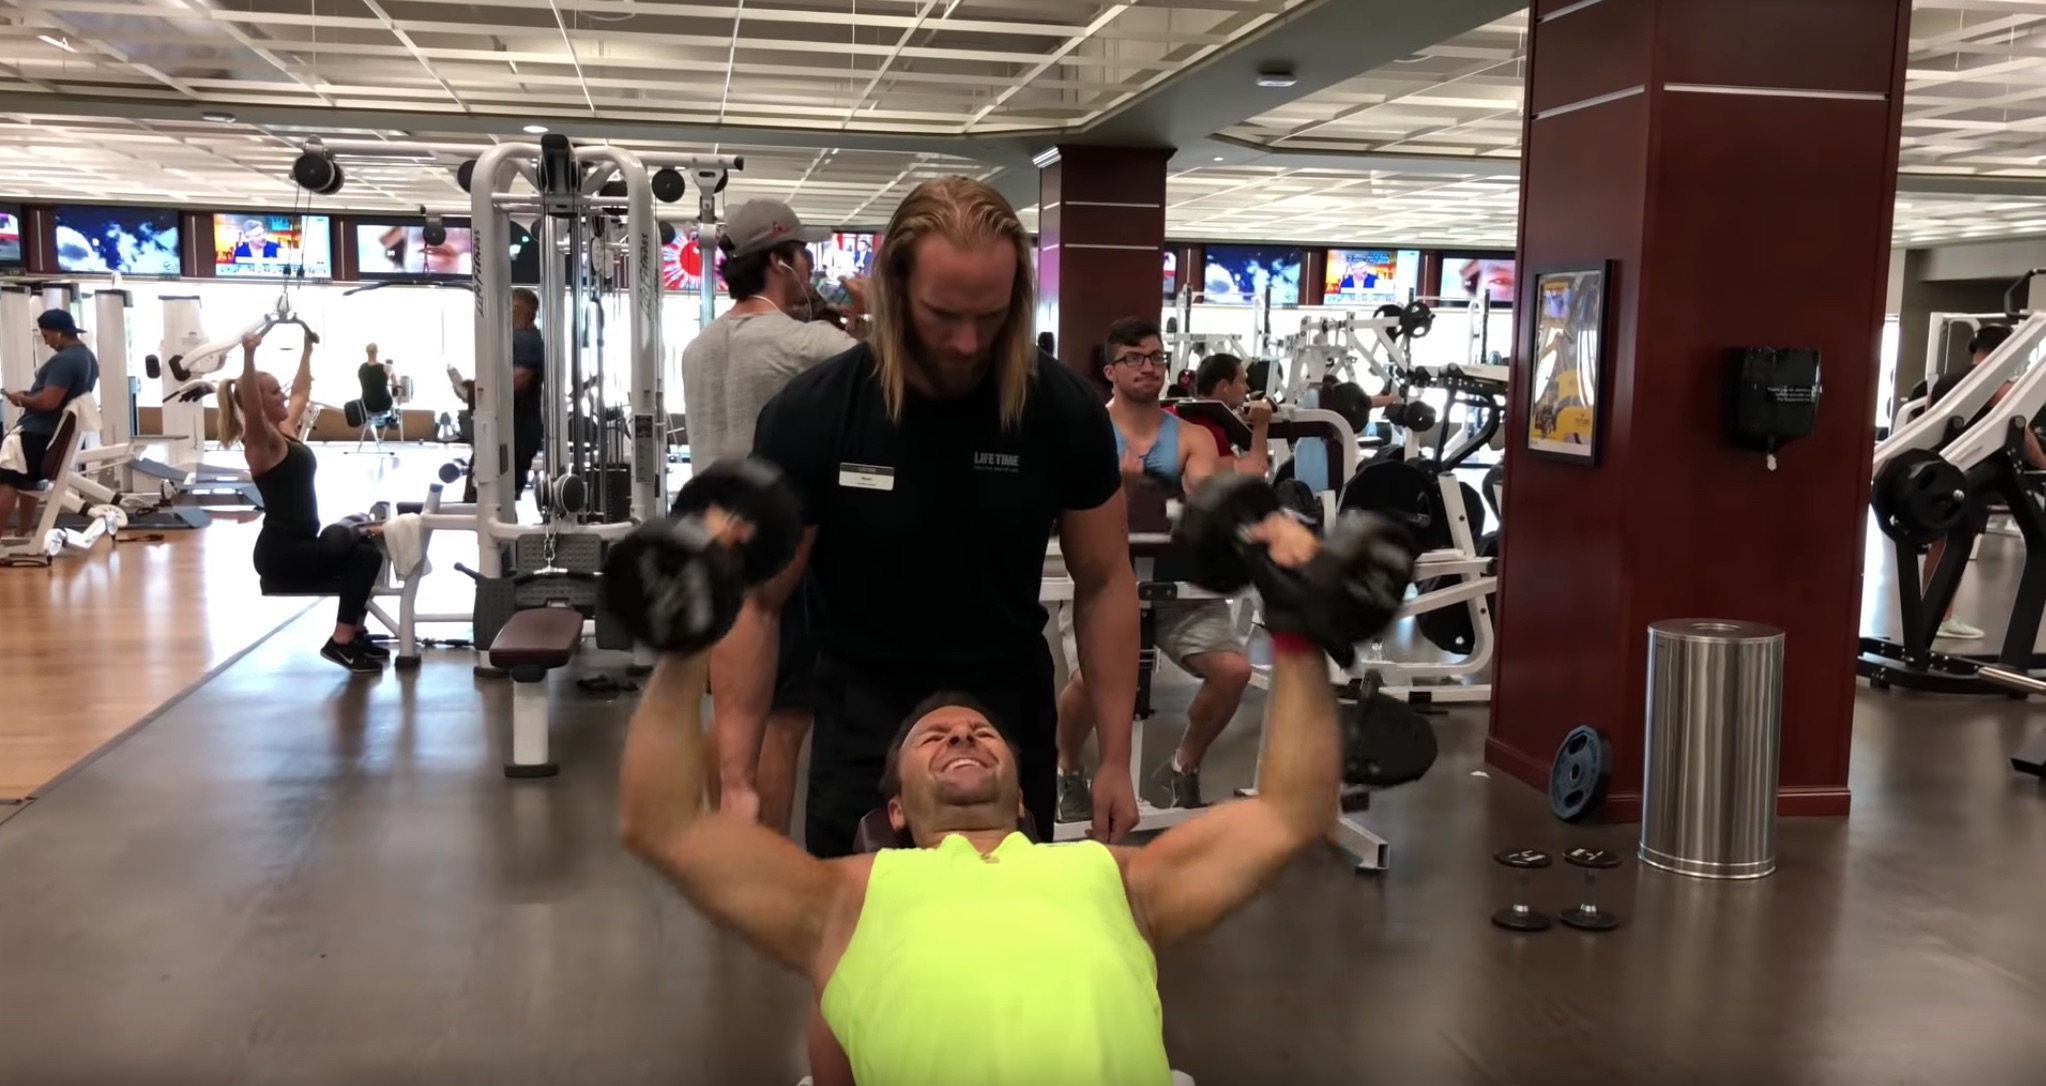 Daniel Negreanu hitting the weights hard in his recent vlog to get ready for the upcoming NHL season.